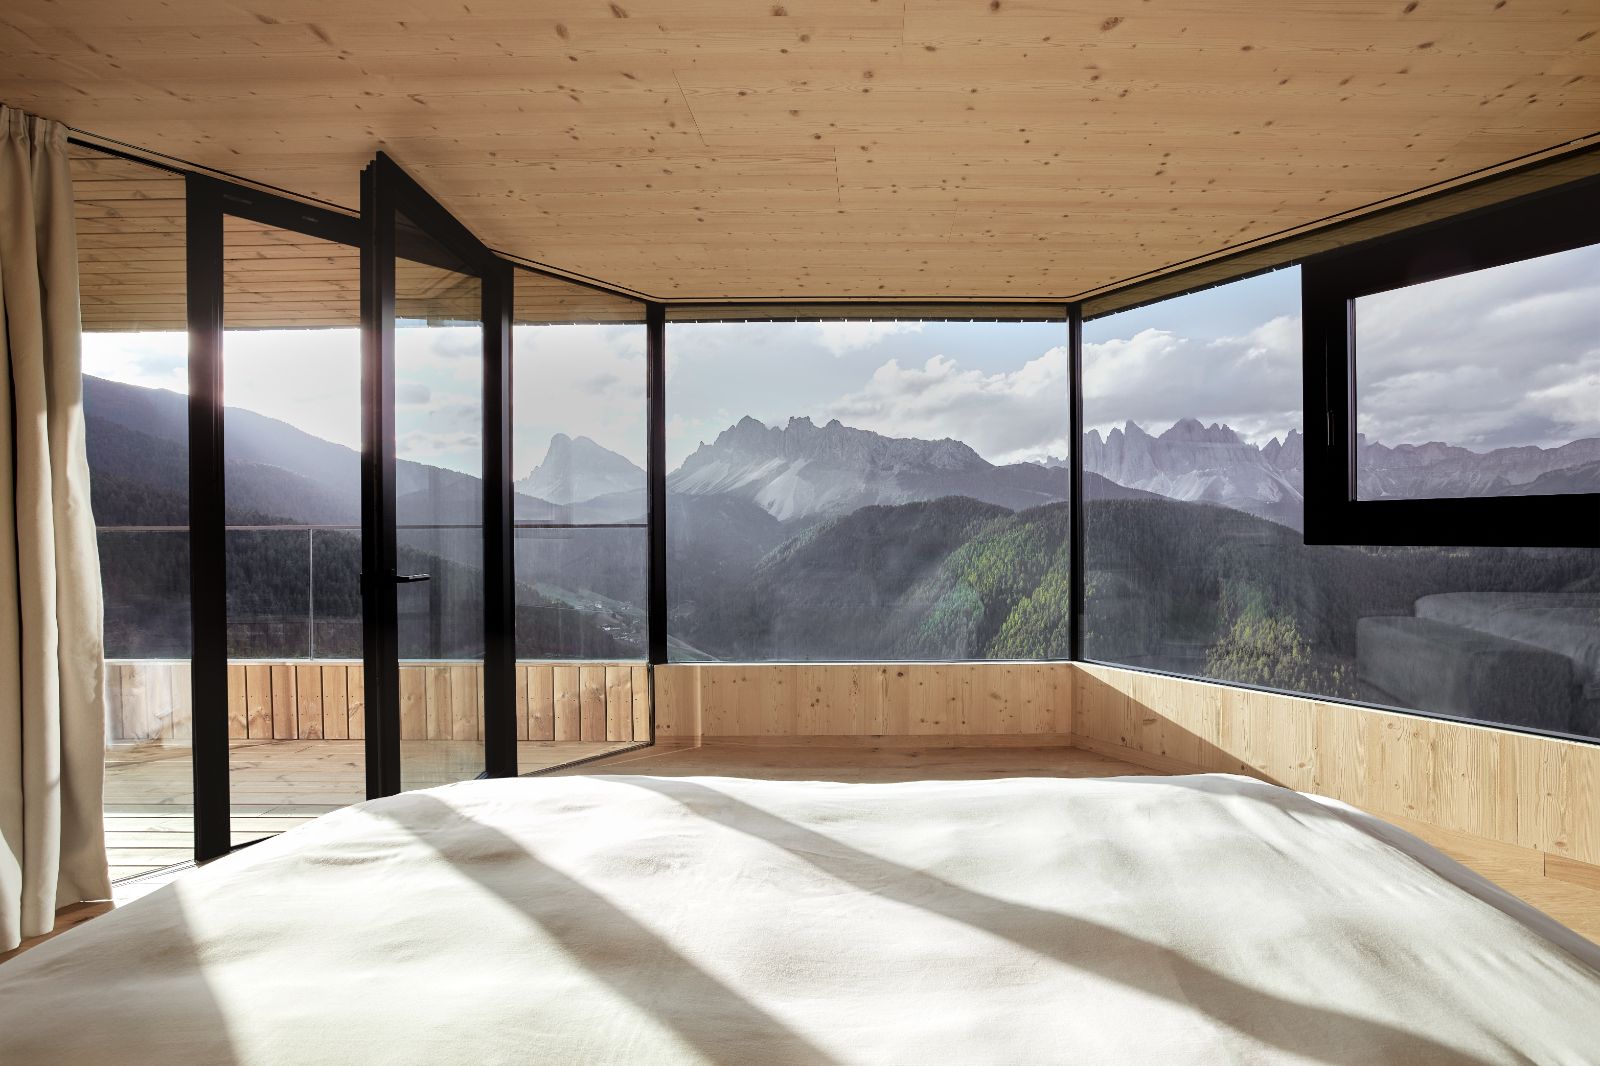 Penthouse suite bed at the Forestis hotel in the Dolomites